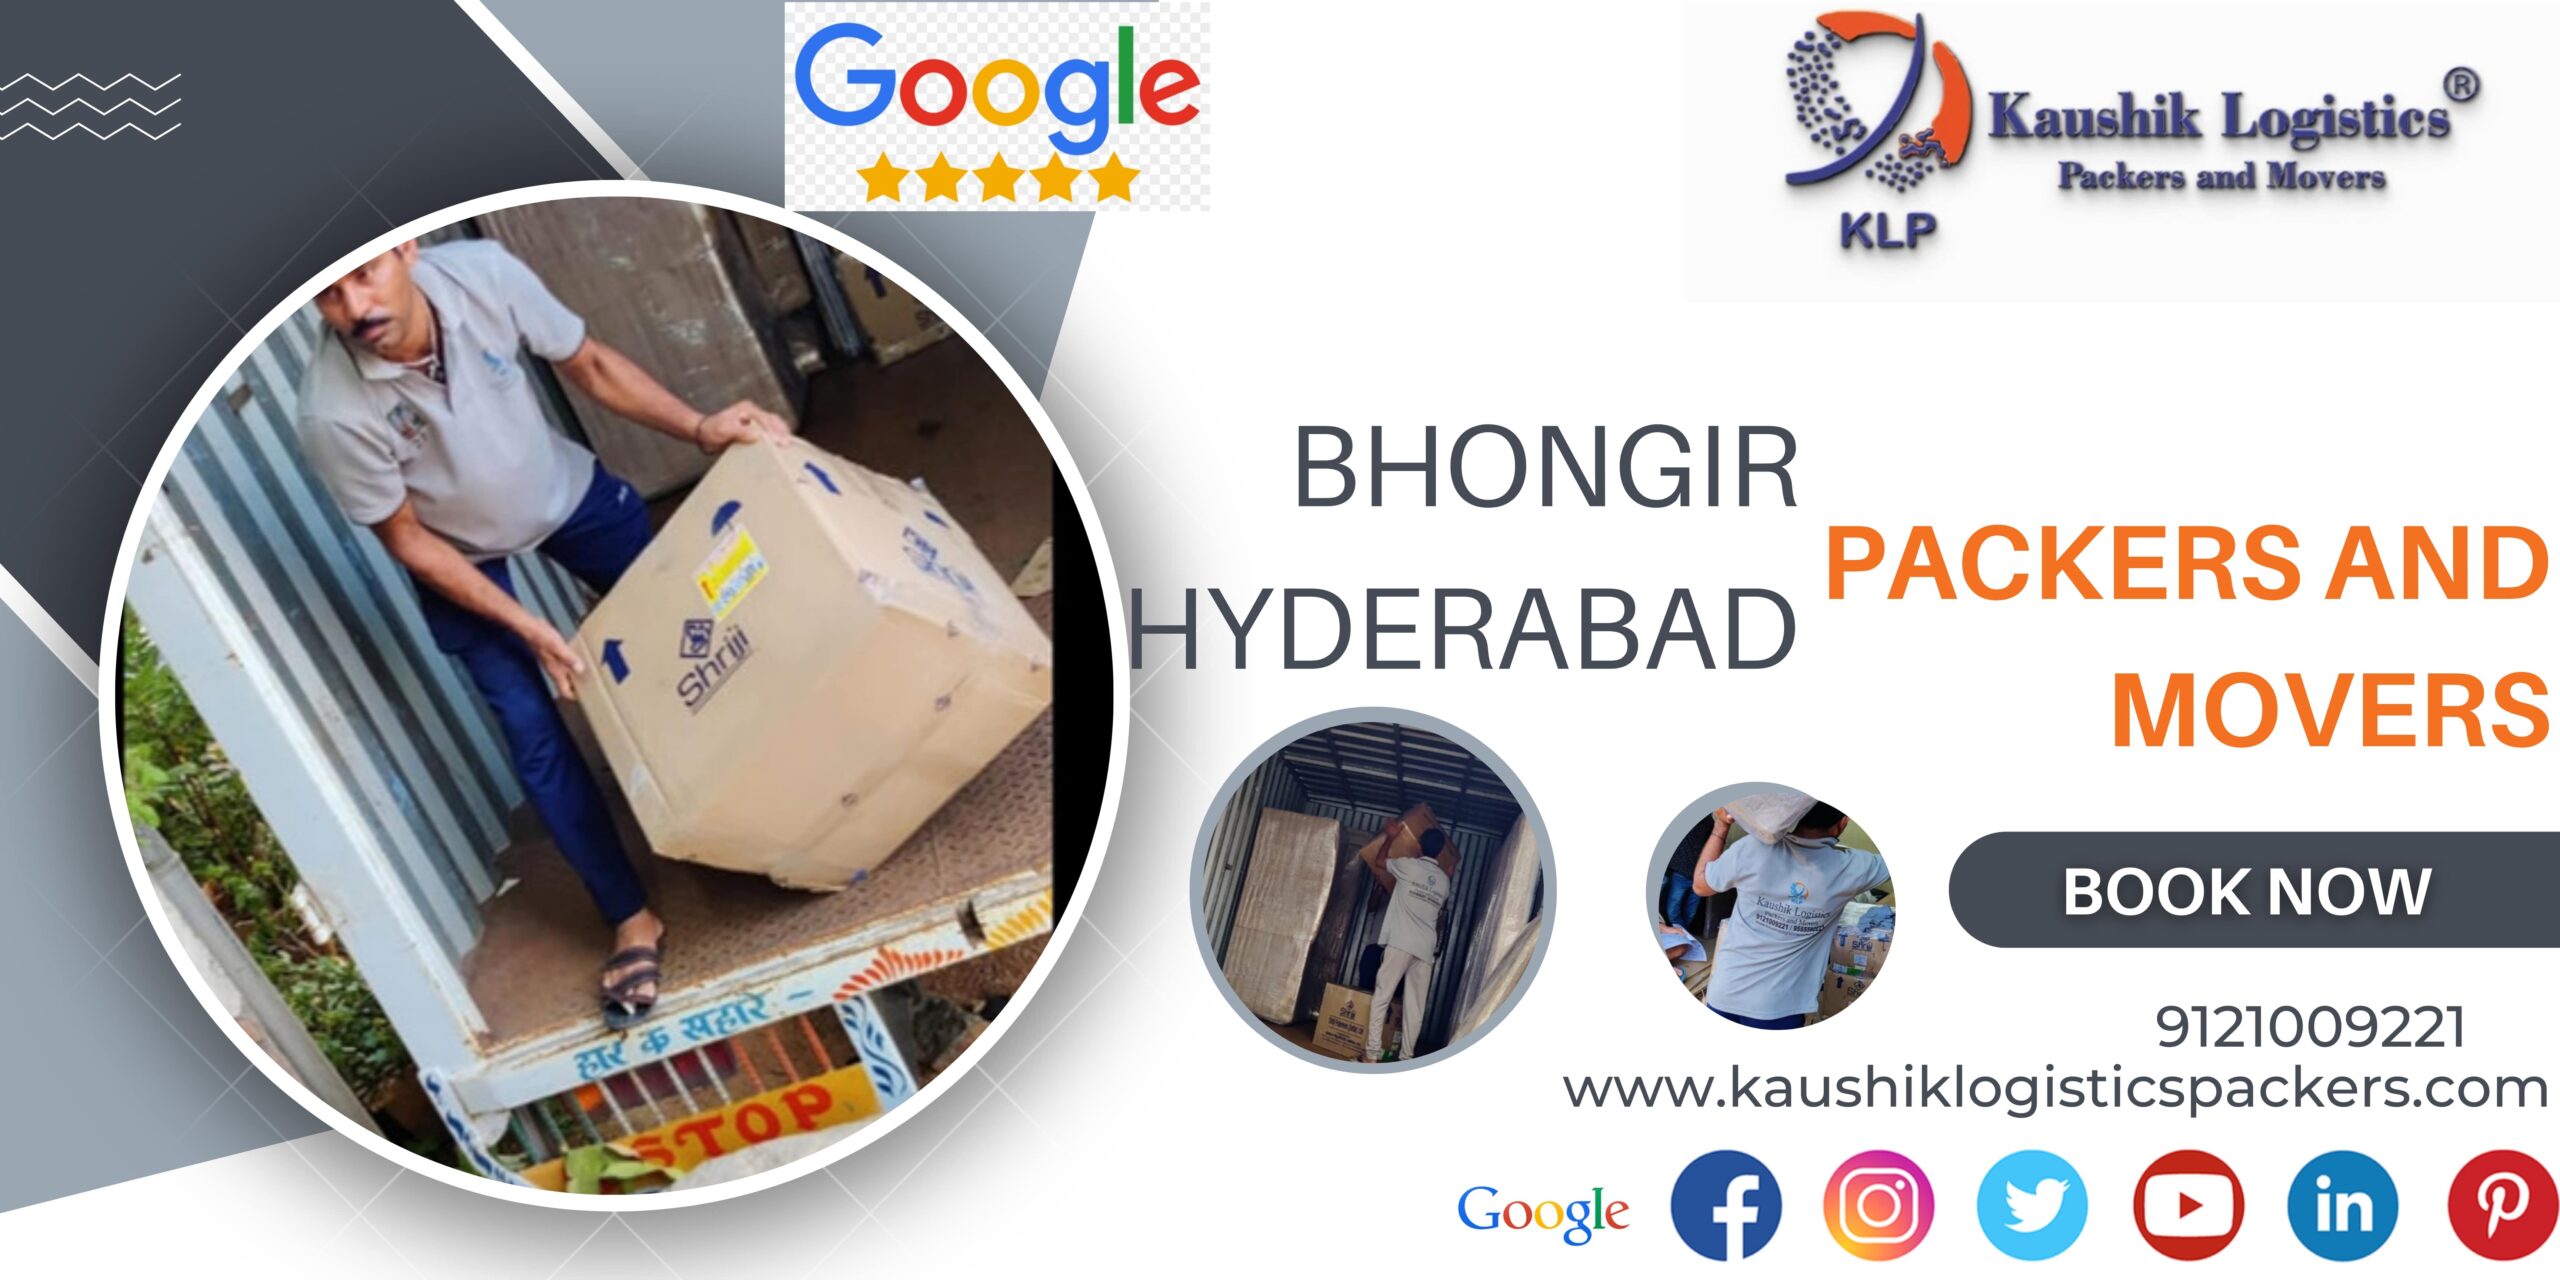 Packers and Movers In Bhongir